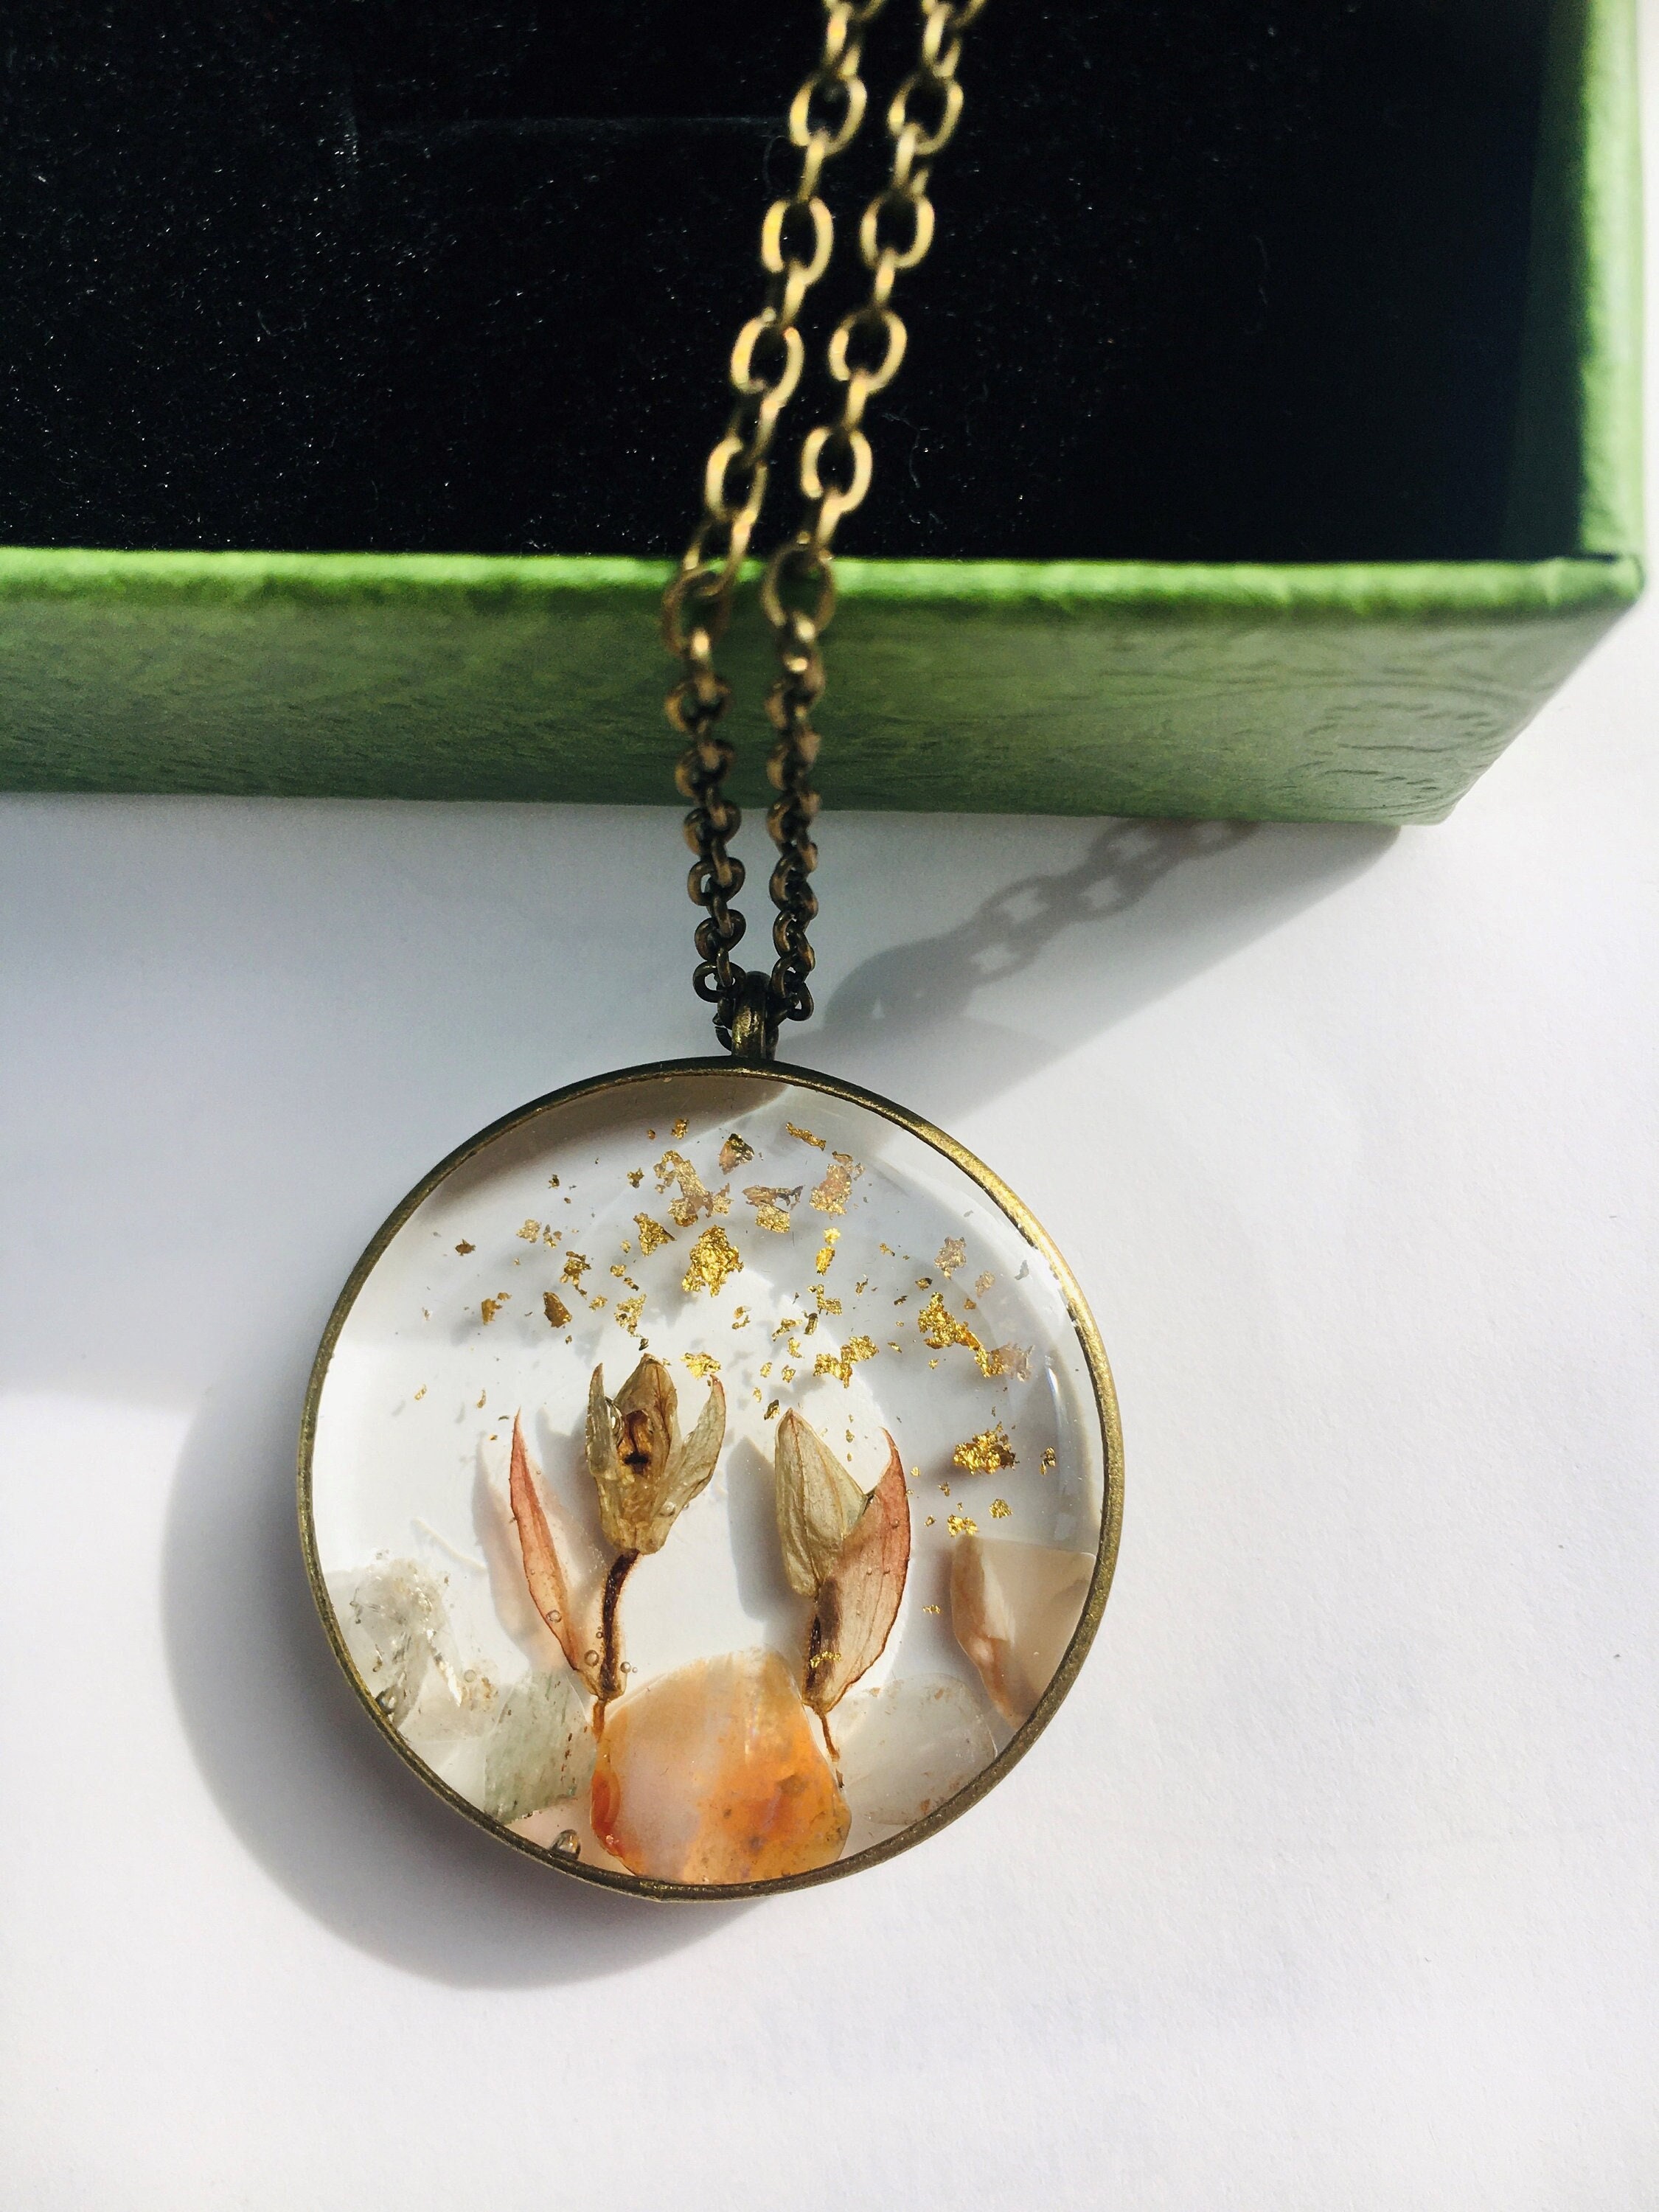 The Sydney Necklace- Crushed Abalone + Gold Leaf Flake Resin Necklace